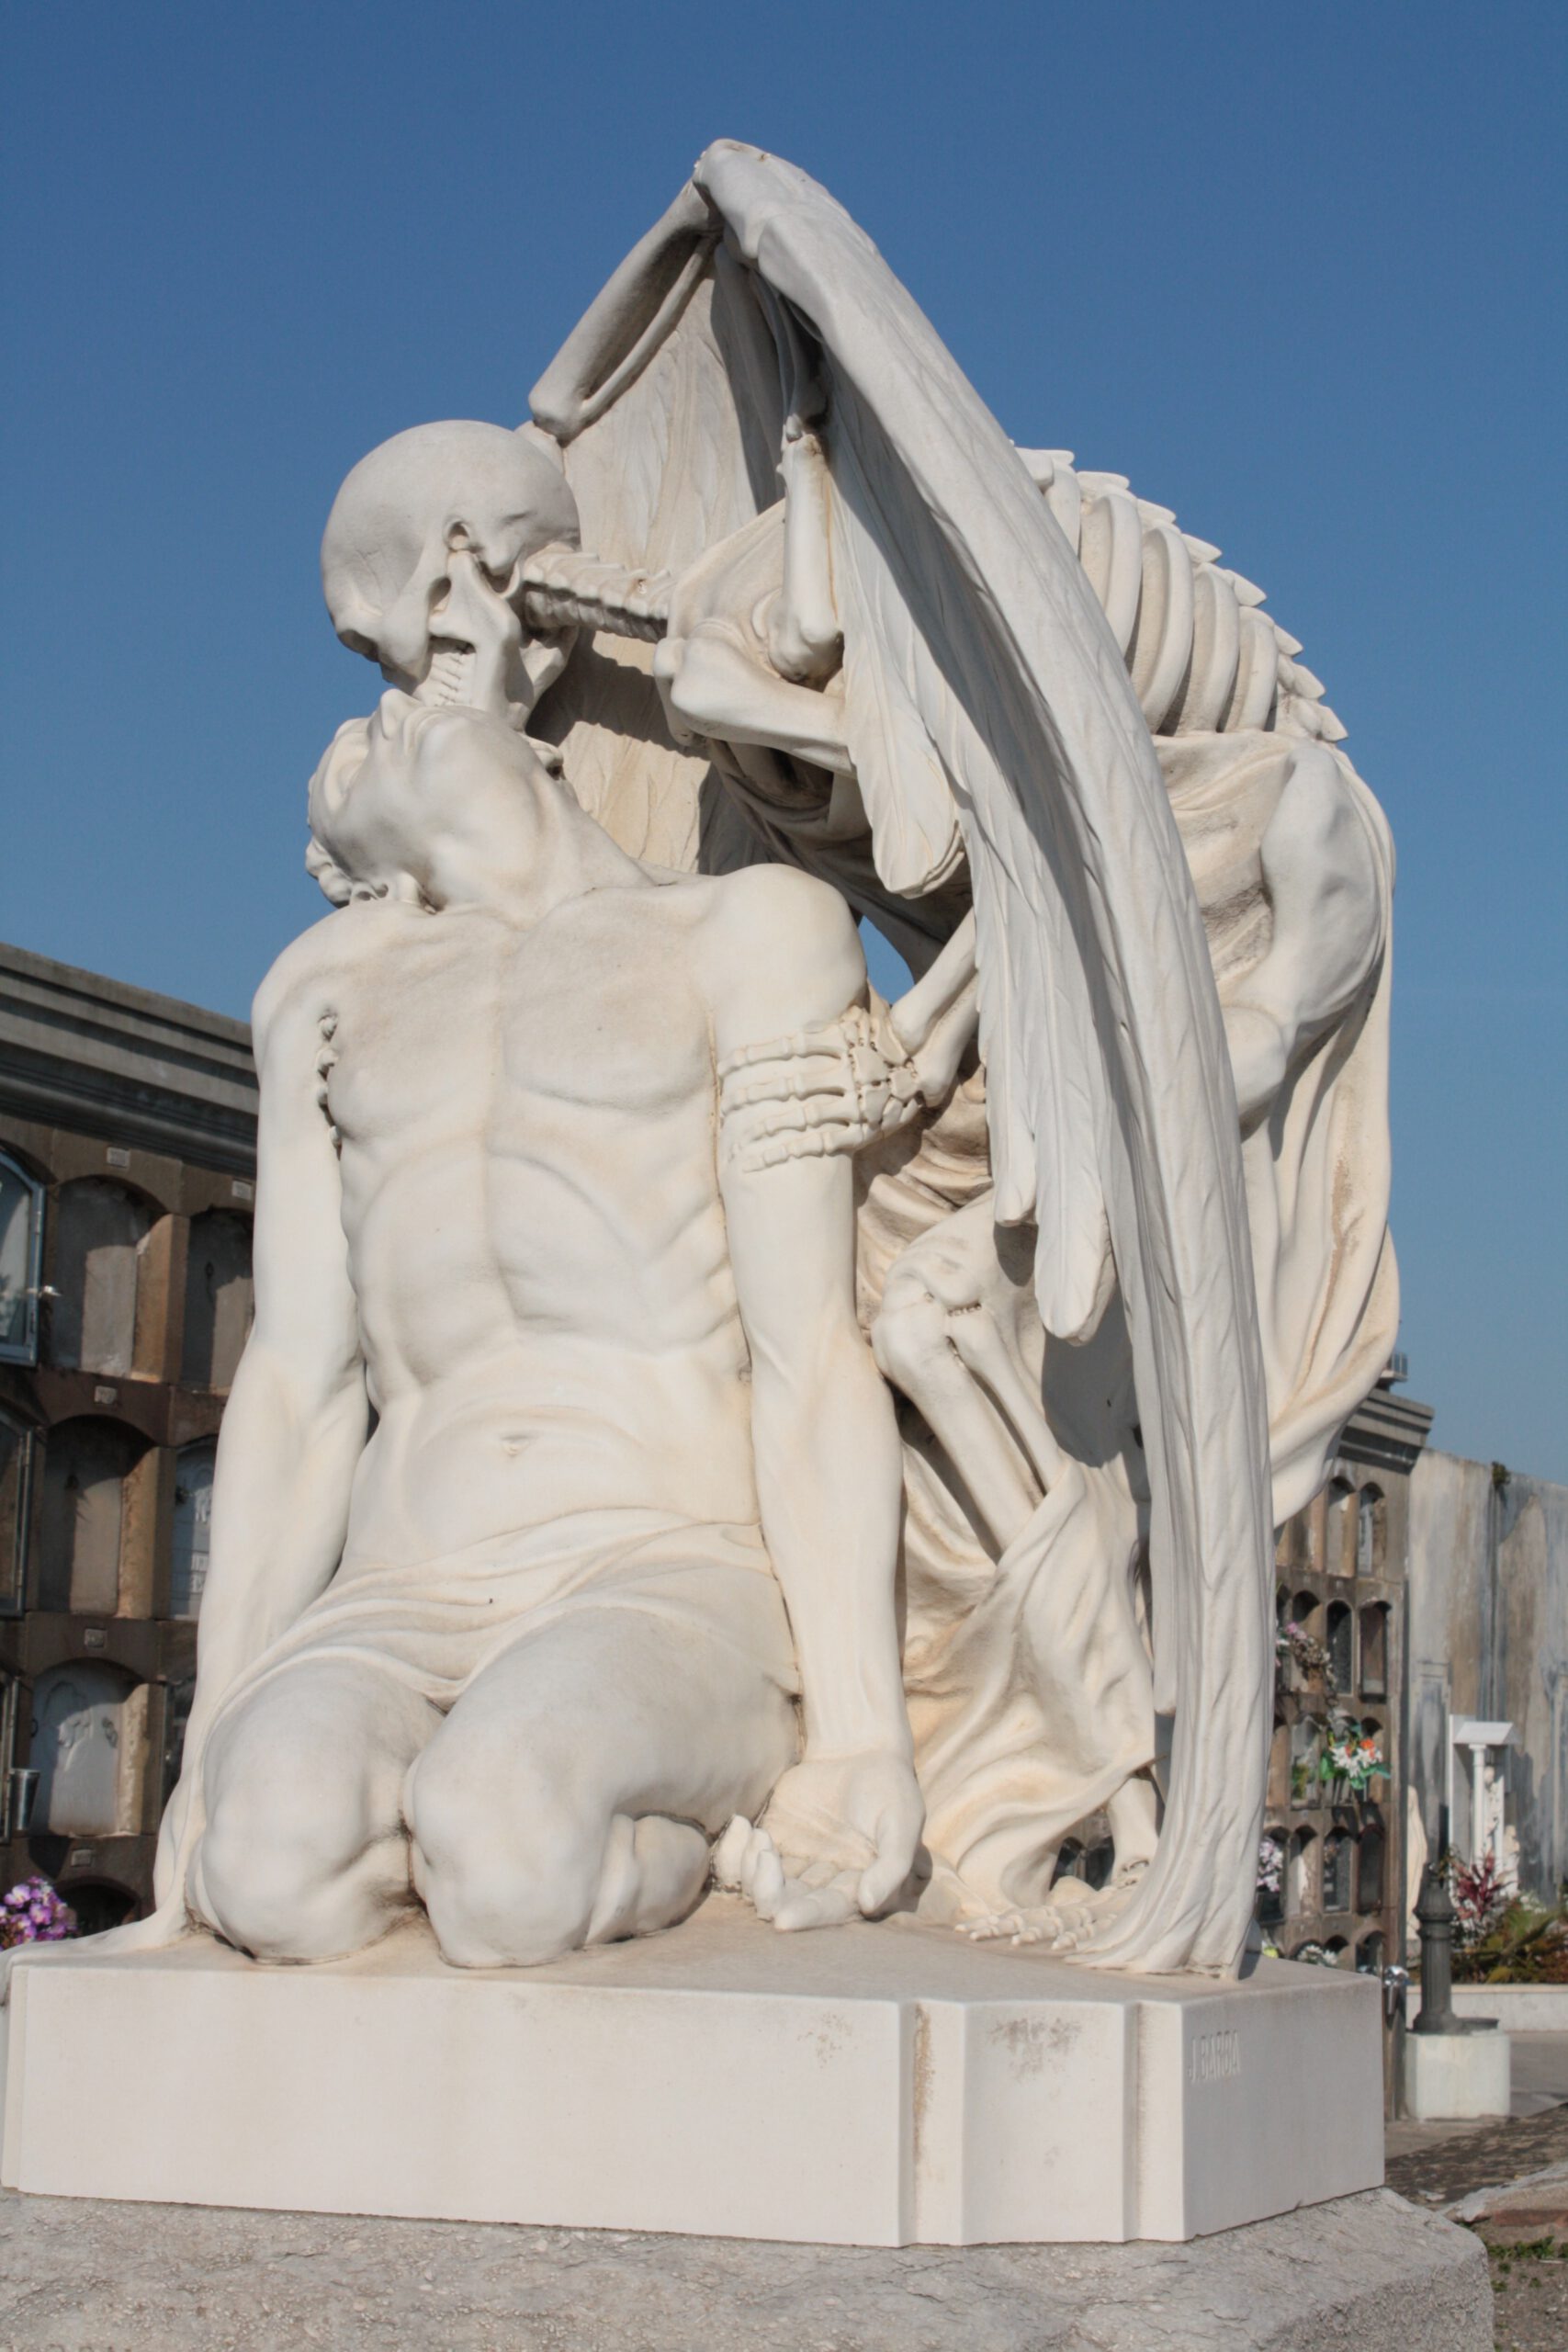 Stone Marble Sculpture – Carved Stone.The Kiss of Death Sculpture